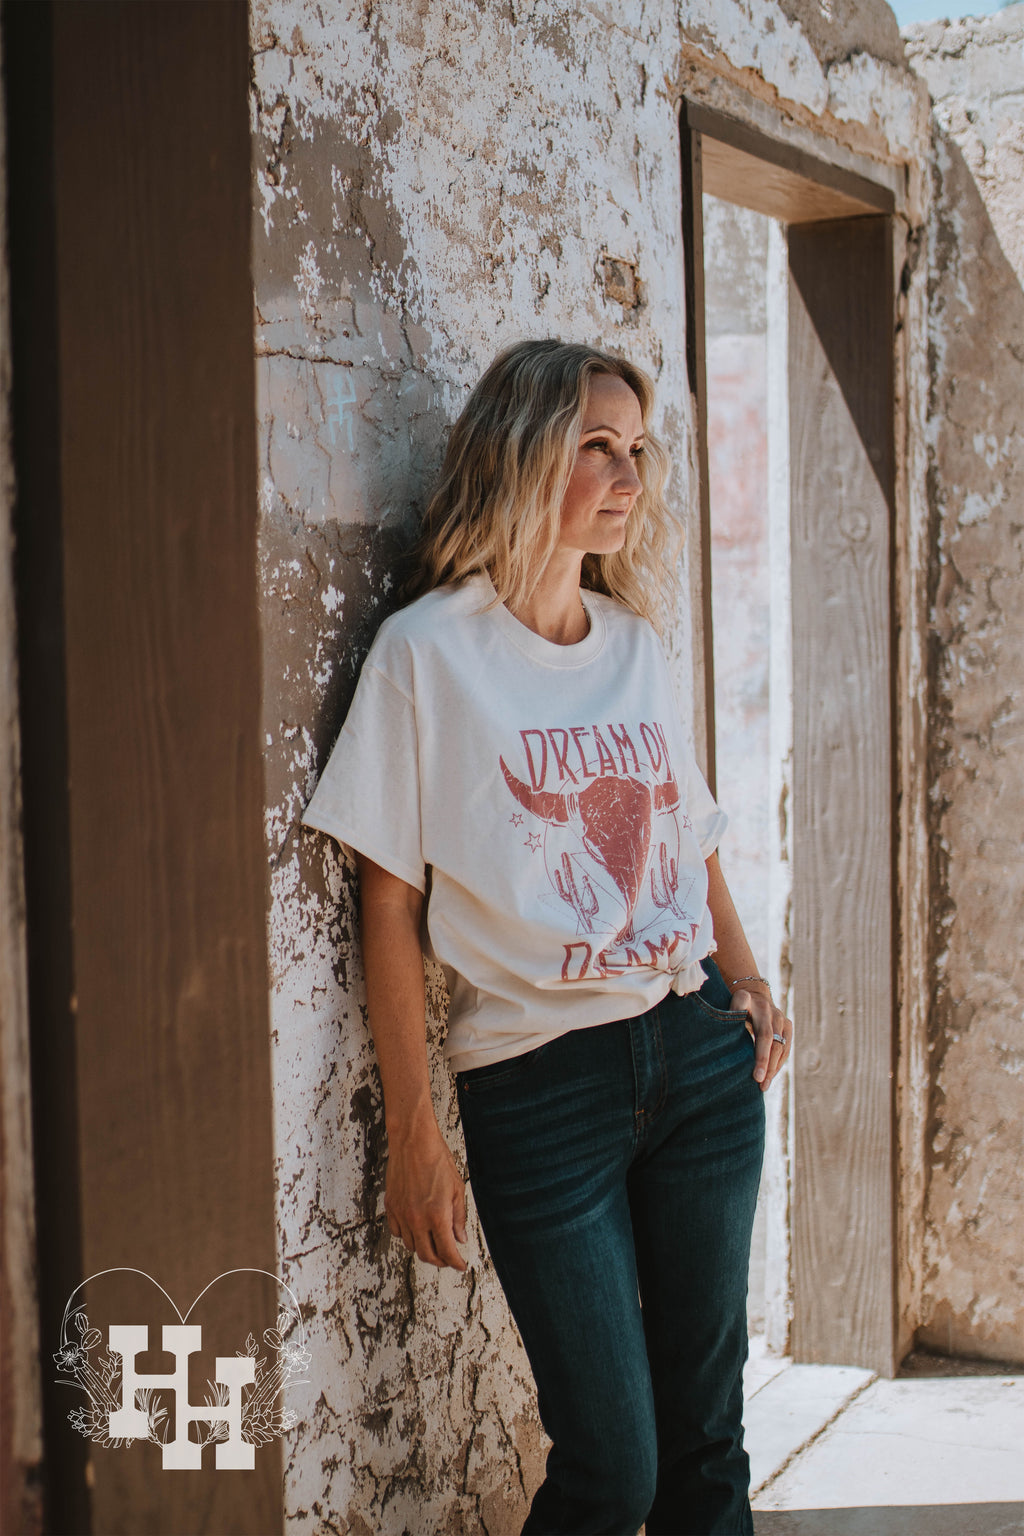 Girl leaning against a wall with a cream colored tshirt that says dream on dreamer with a longhorn sckull in dusty rose. She is wearing this tshirt with dark blue jeans.